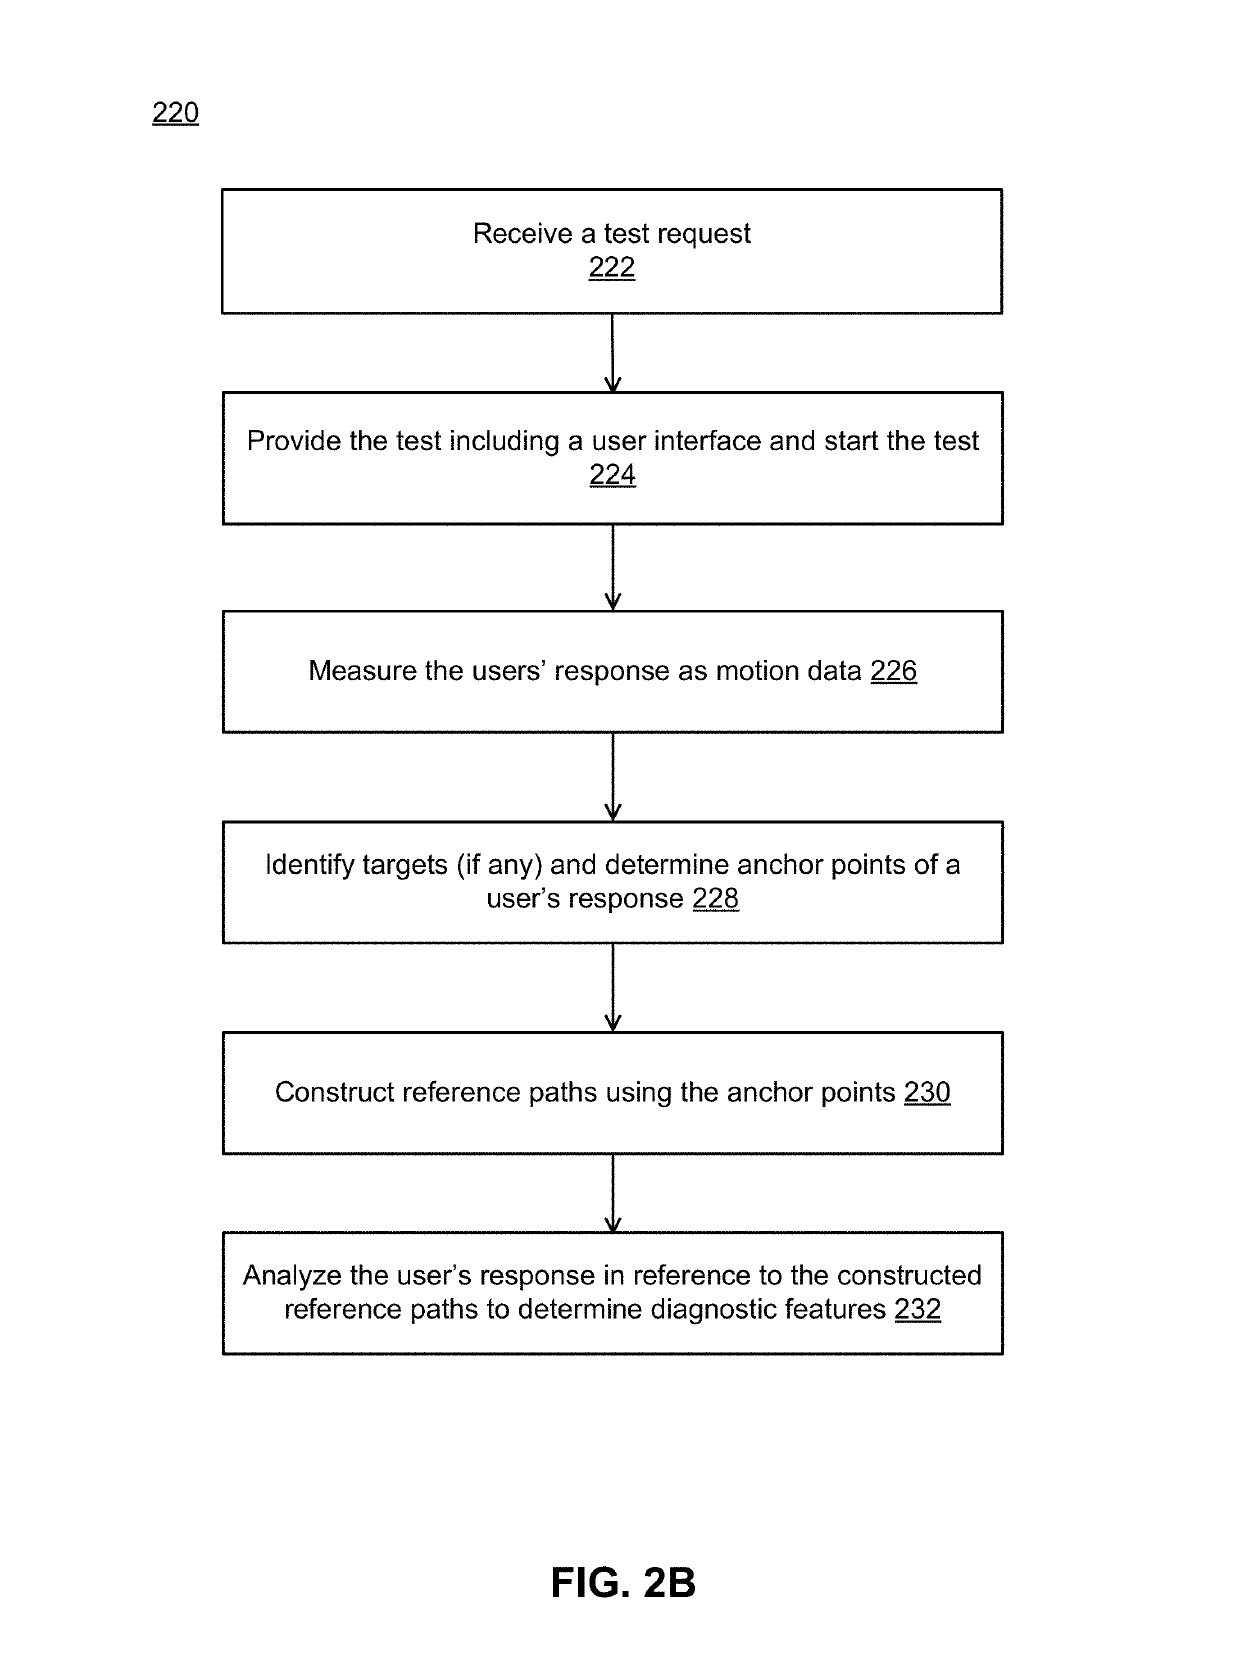 Data collection and analysis for self-administered cognitive tests characterizing fine motor functions